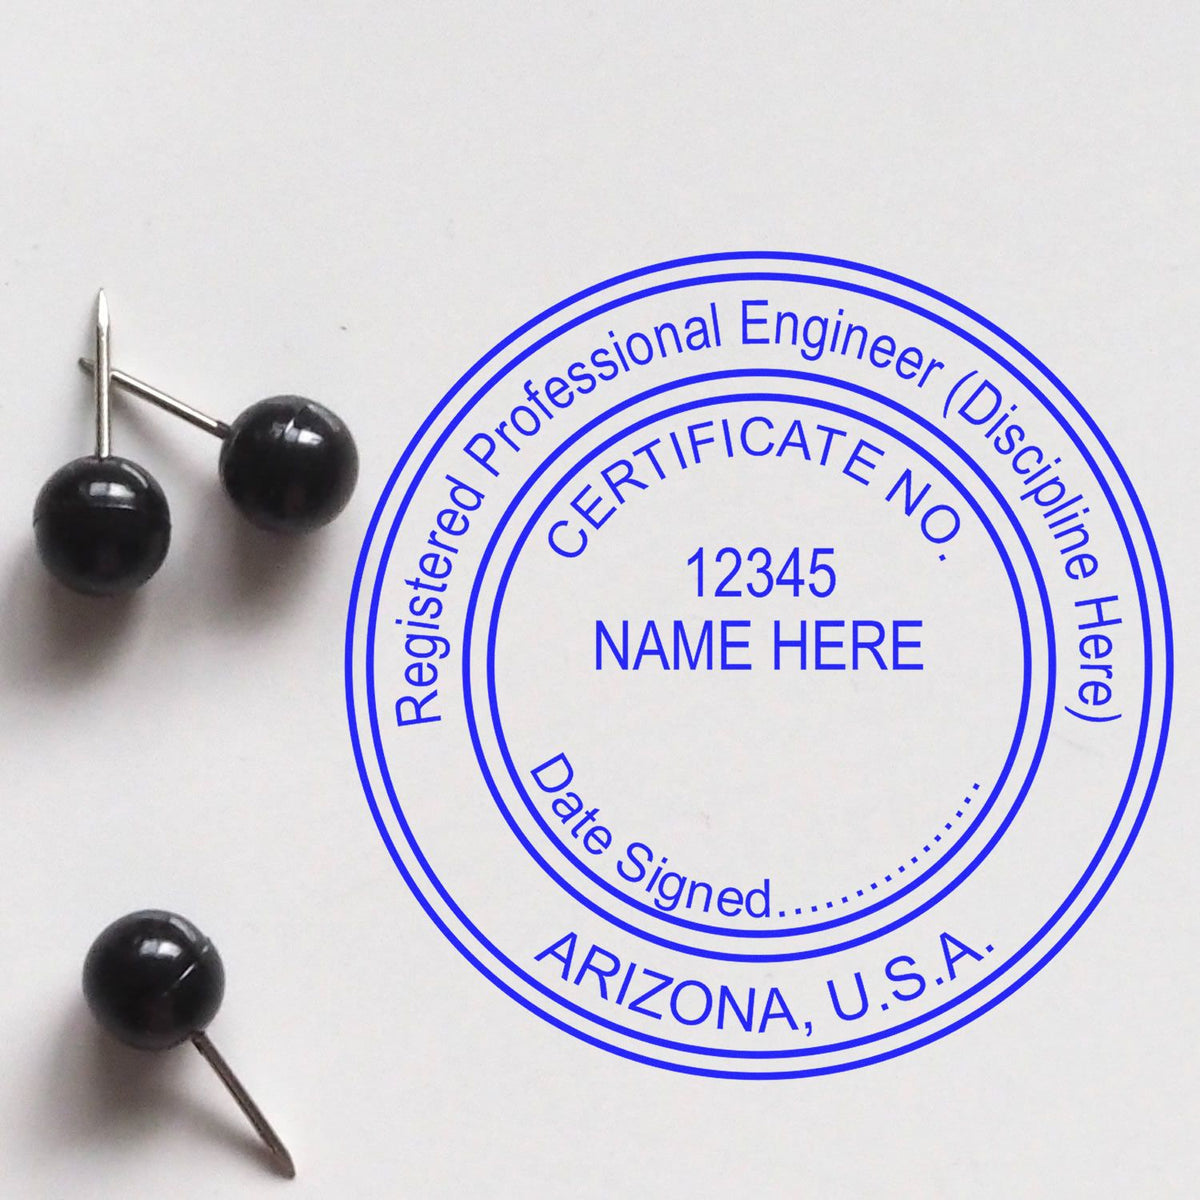 The Digital Arizona PE Stamp and Electronic Seal for Arizona Engineer stamp impression comes to life with a crisp, detailed photo on paper - showcasing true professional quality.